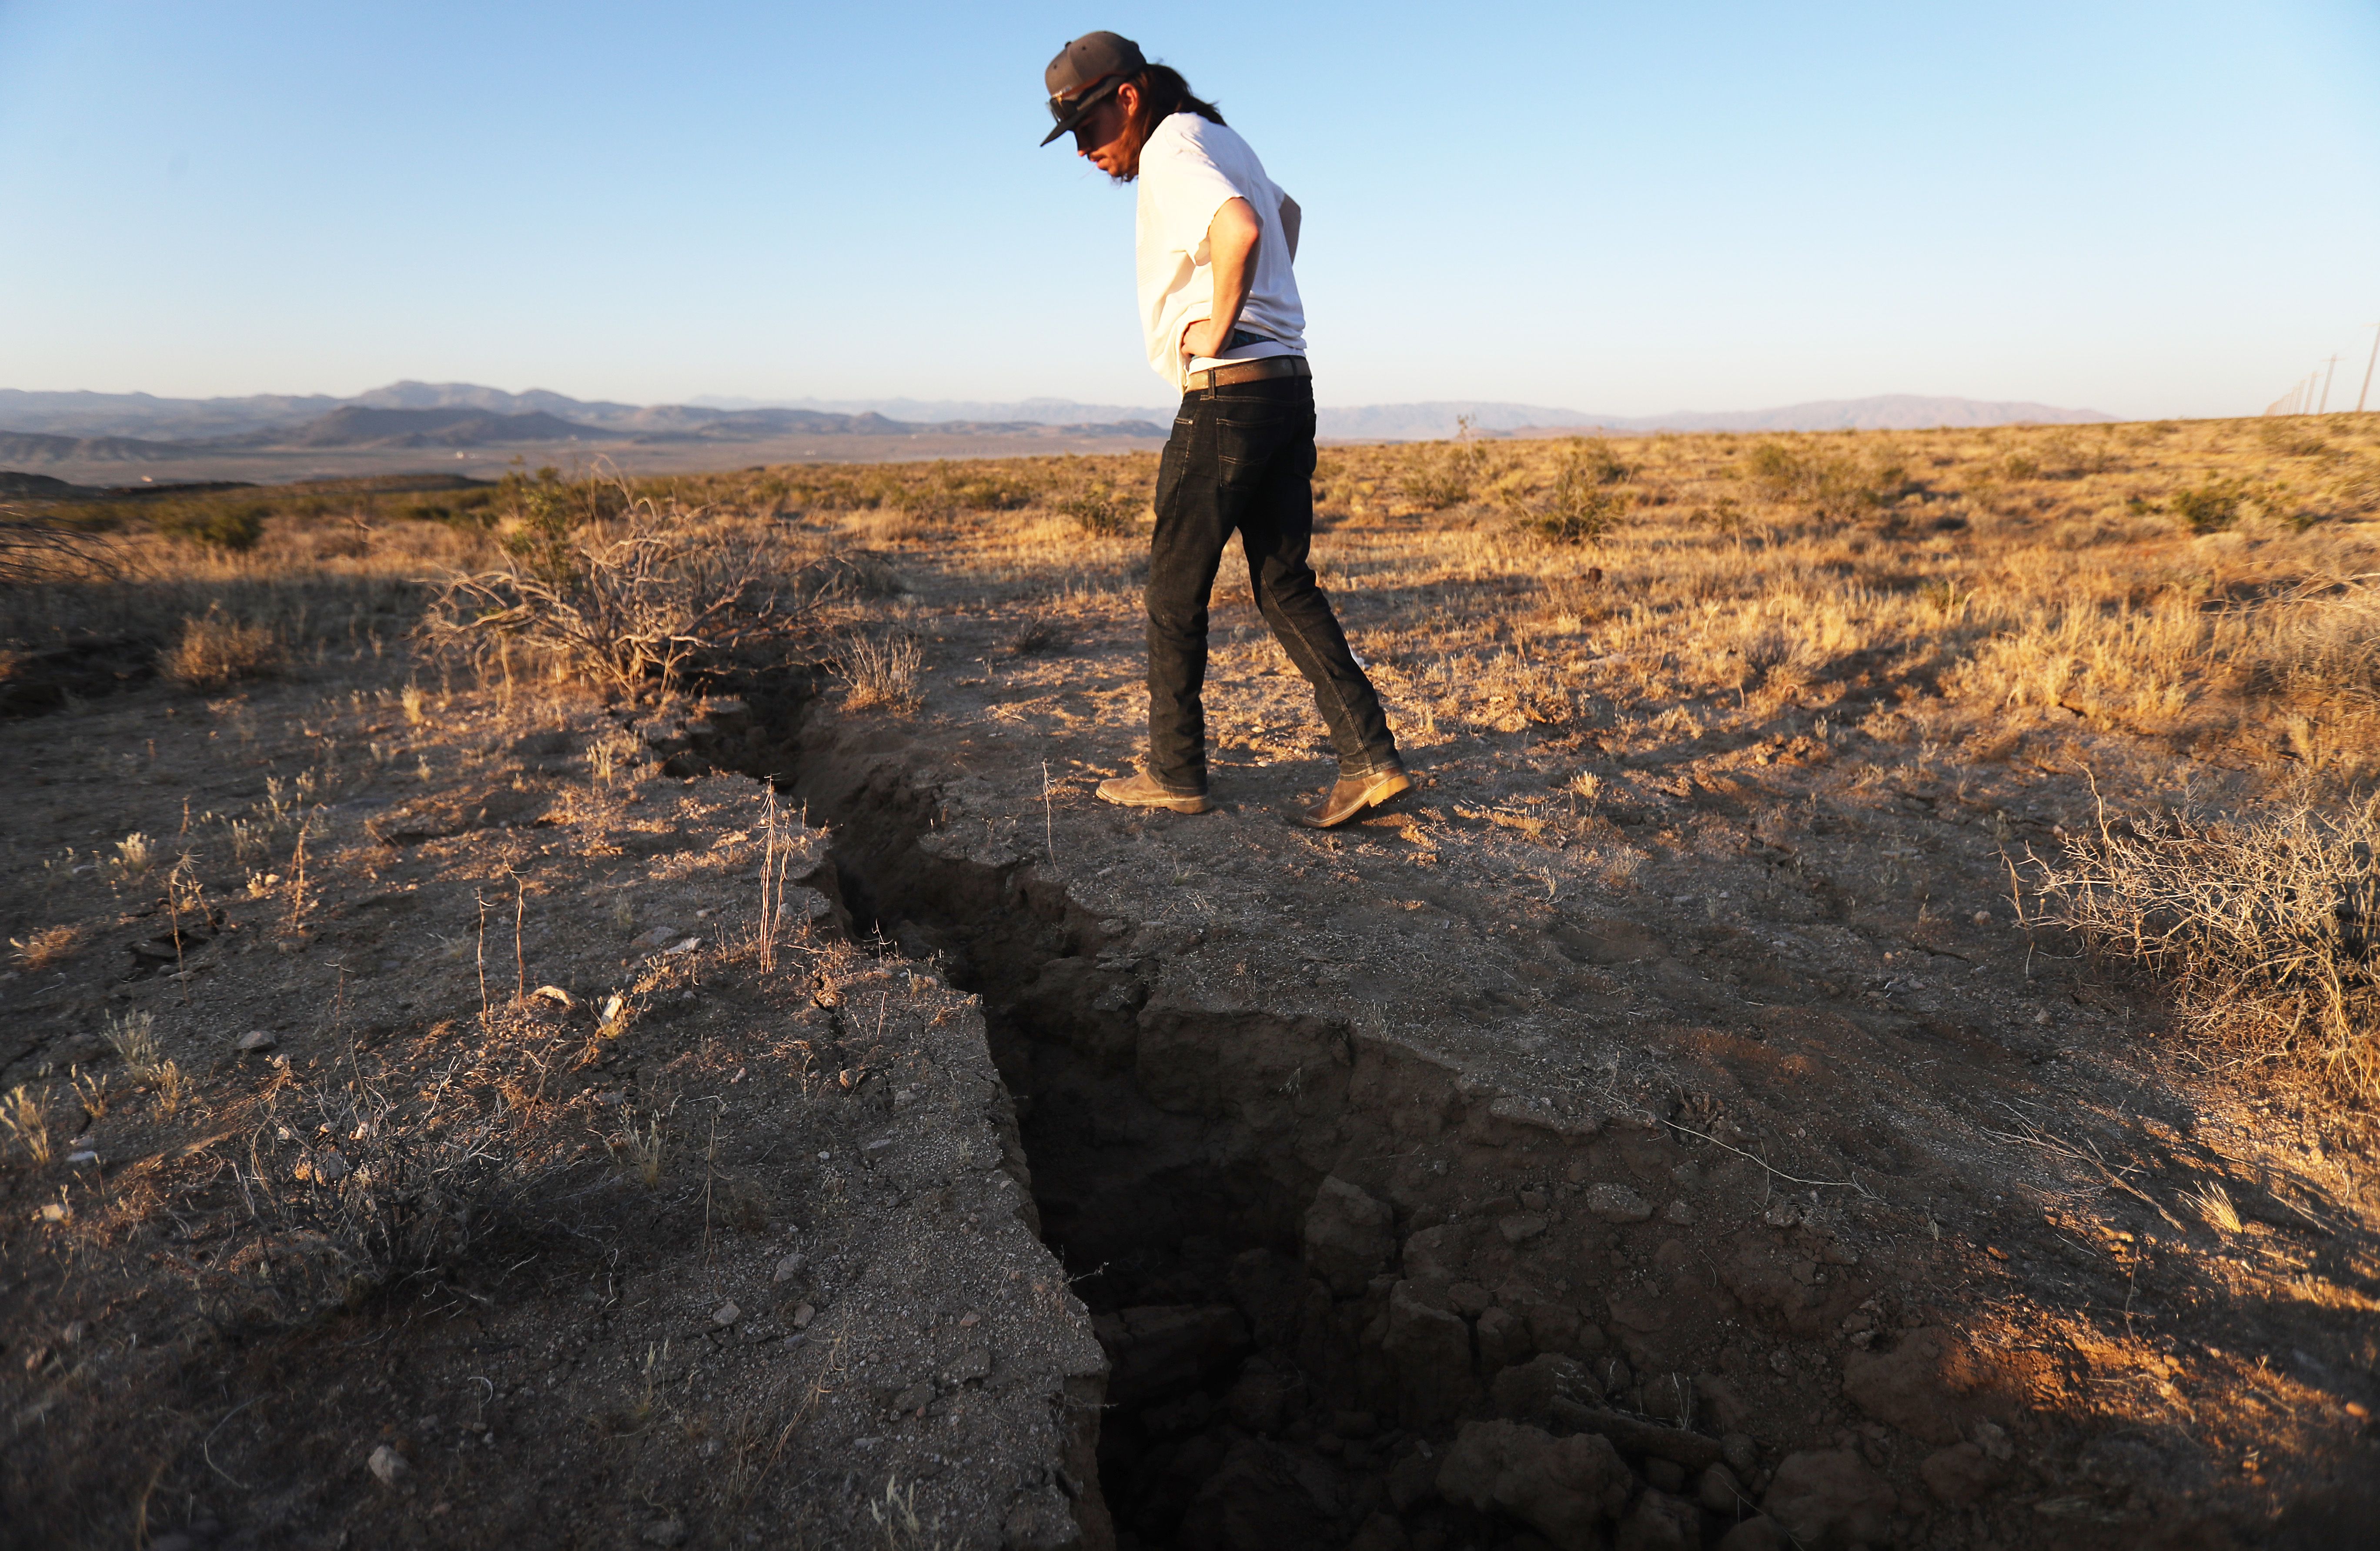 This image shows a man inspecting a fissure in the ground in the desert.